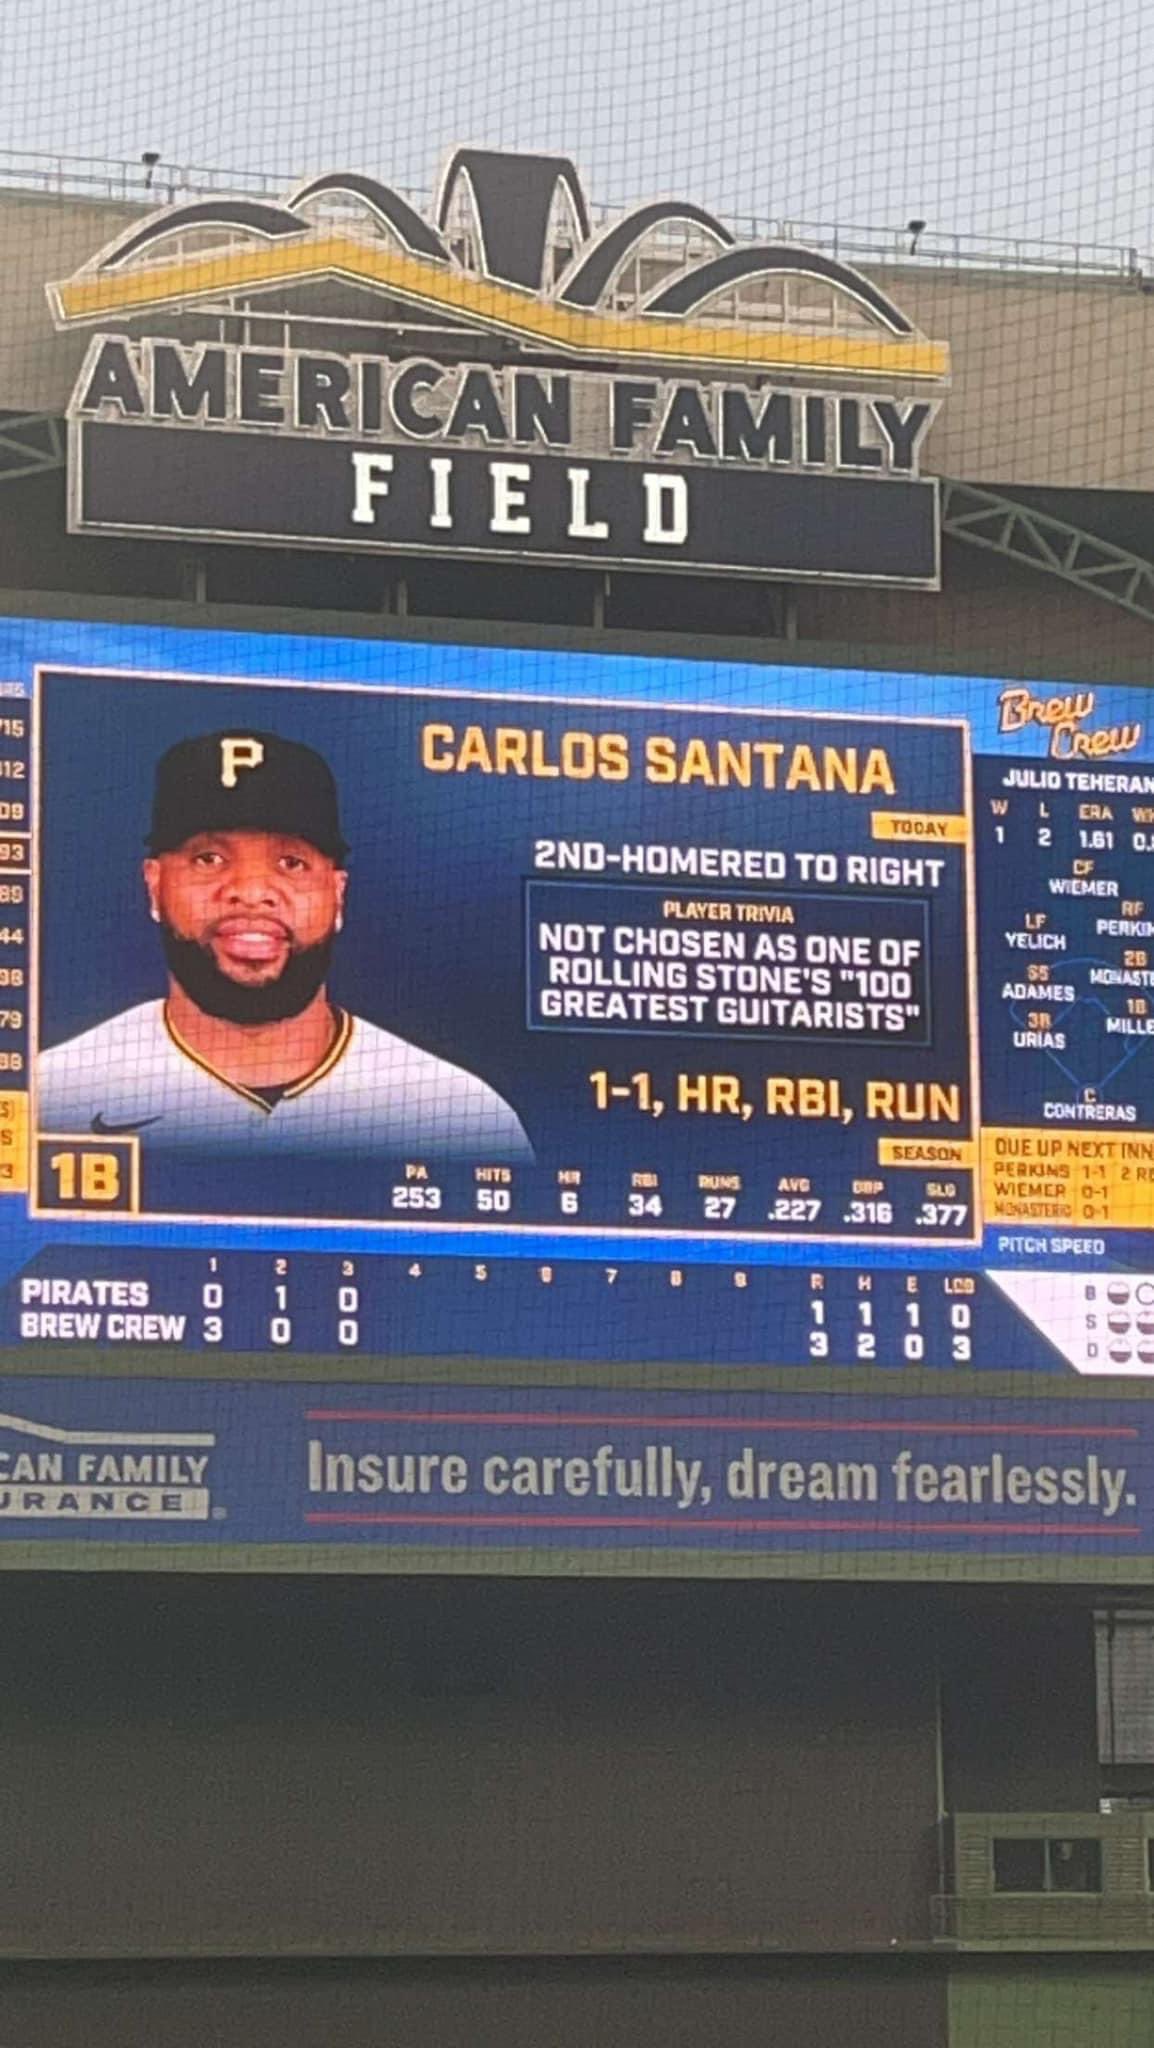 BaseballHistoryNut on X: I love these “Fun Facts” some teams do on the  scoreboard. This one about Carlos Santana made me chuckle   / X